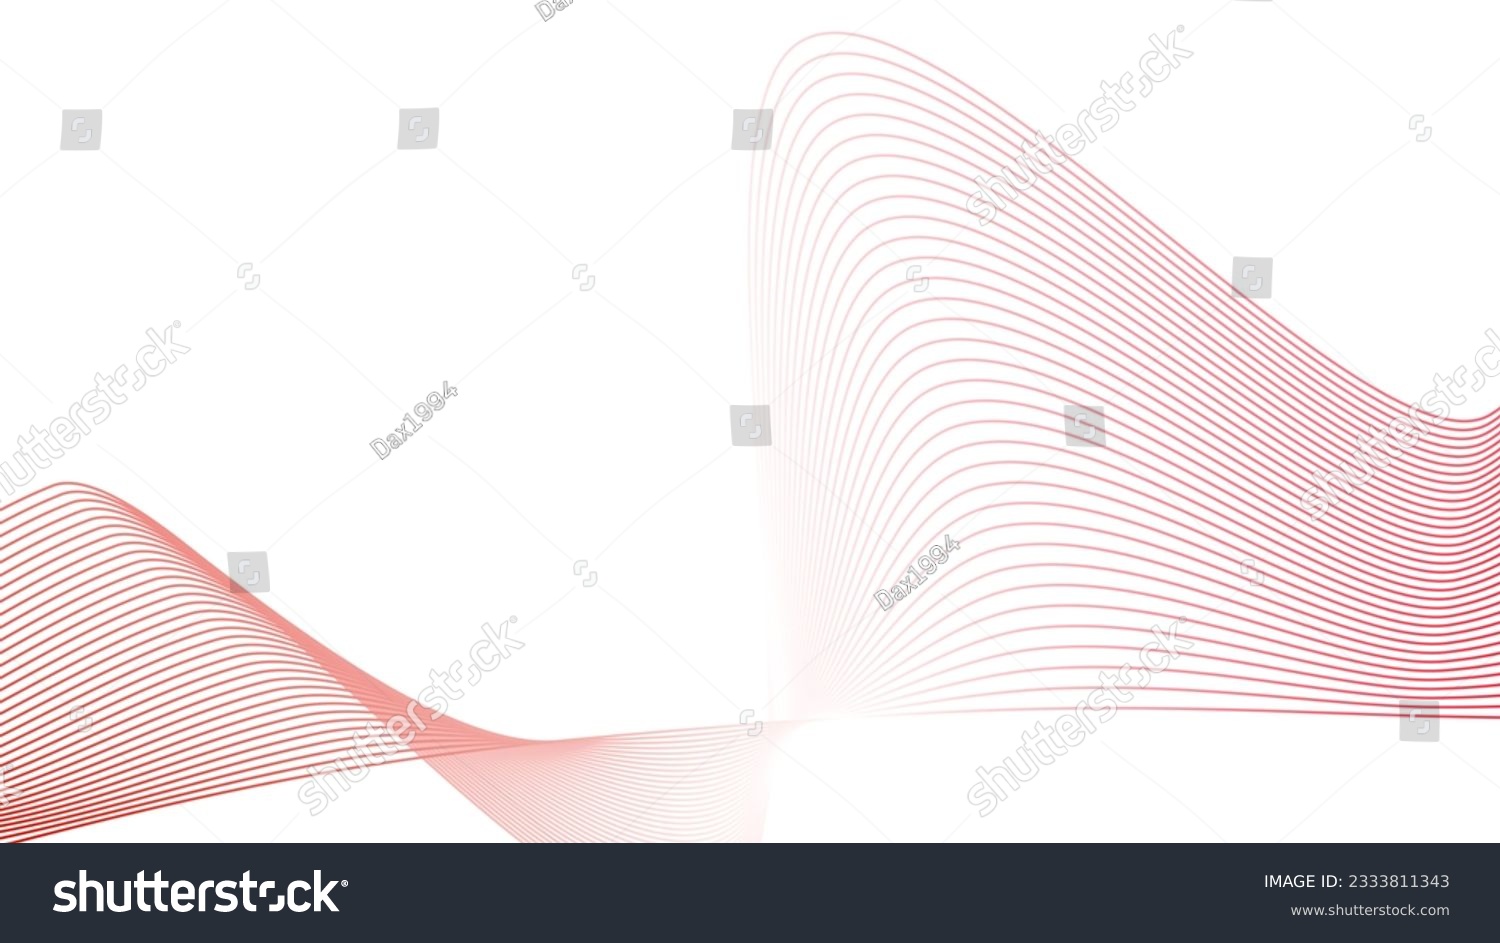 abstract wavy tech lines white red flag gradient background #2333811343